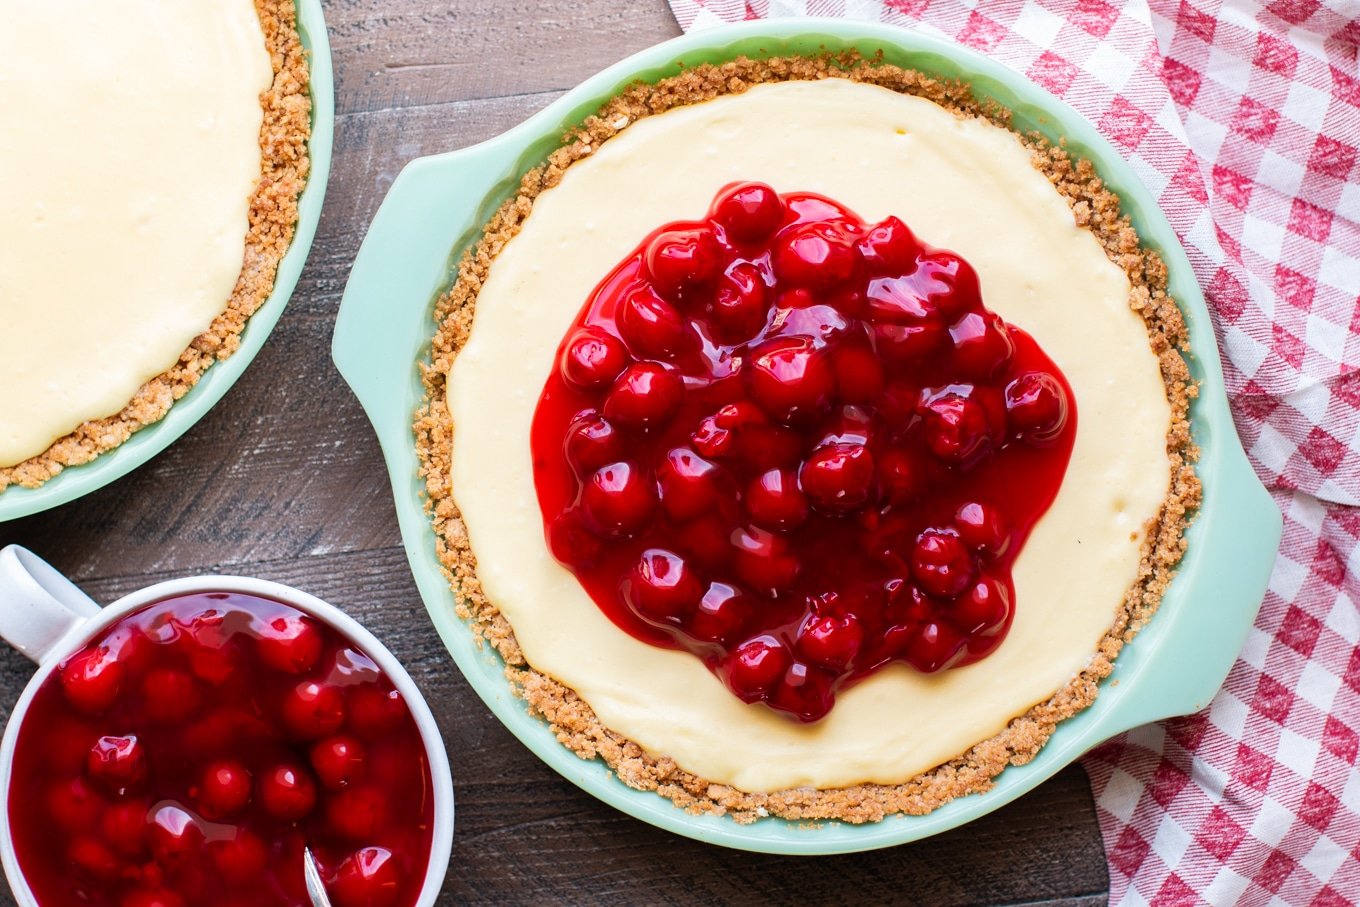 cream cheese pie with cherries on top and cherries on the side.